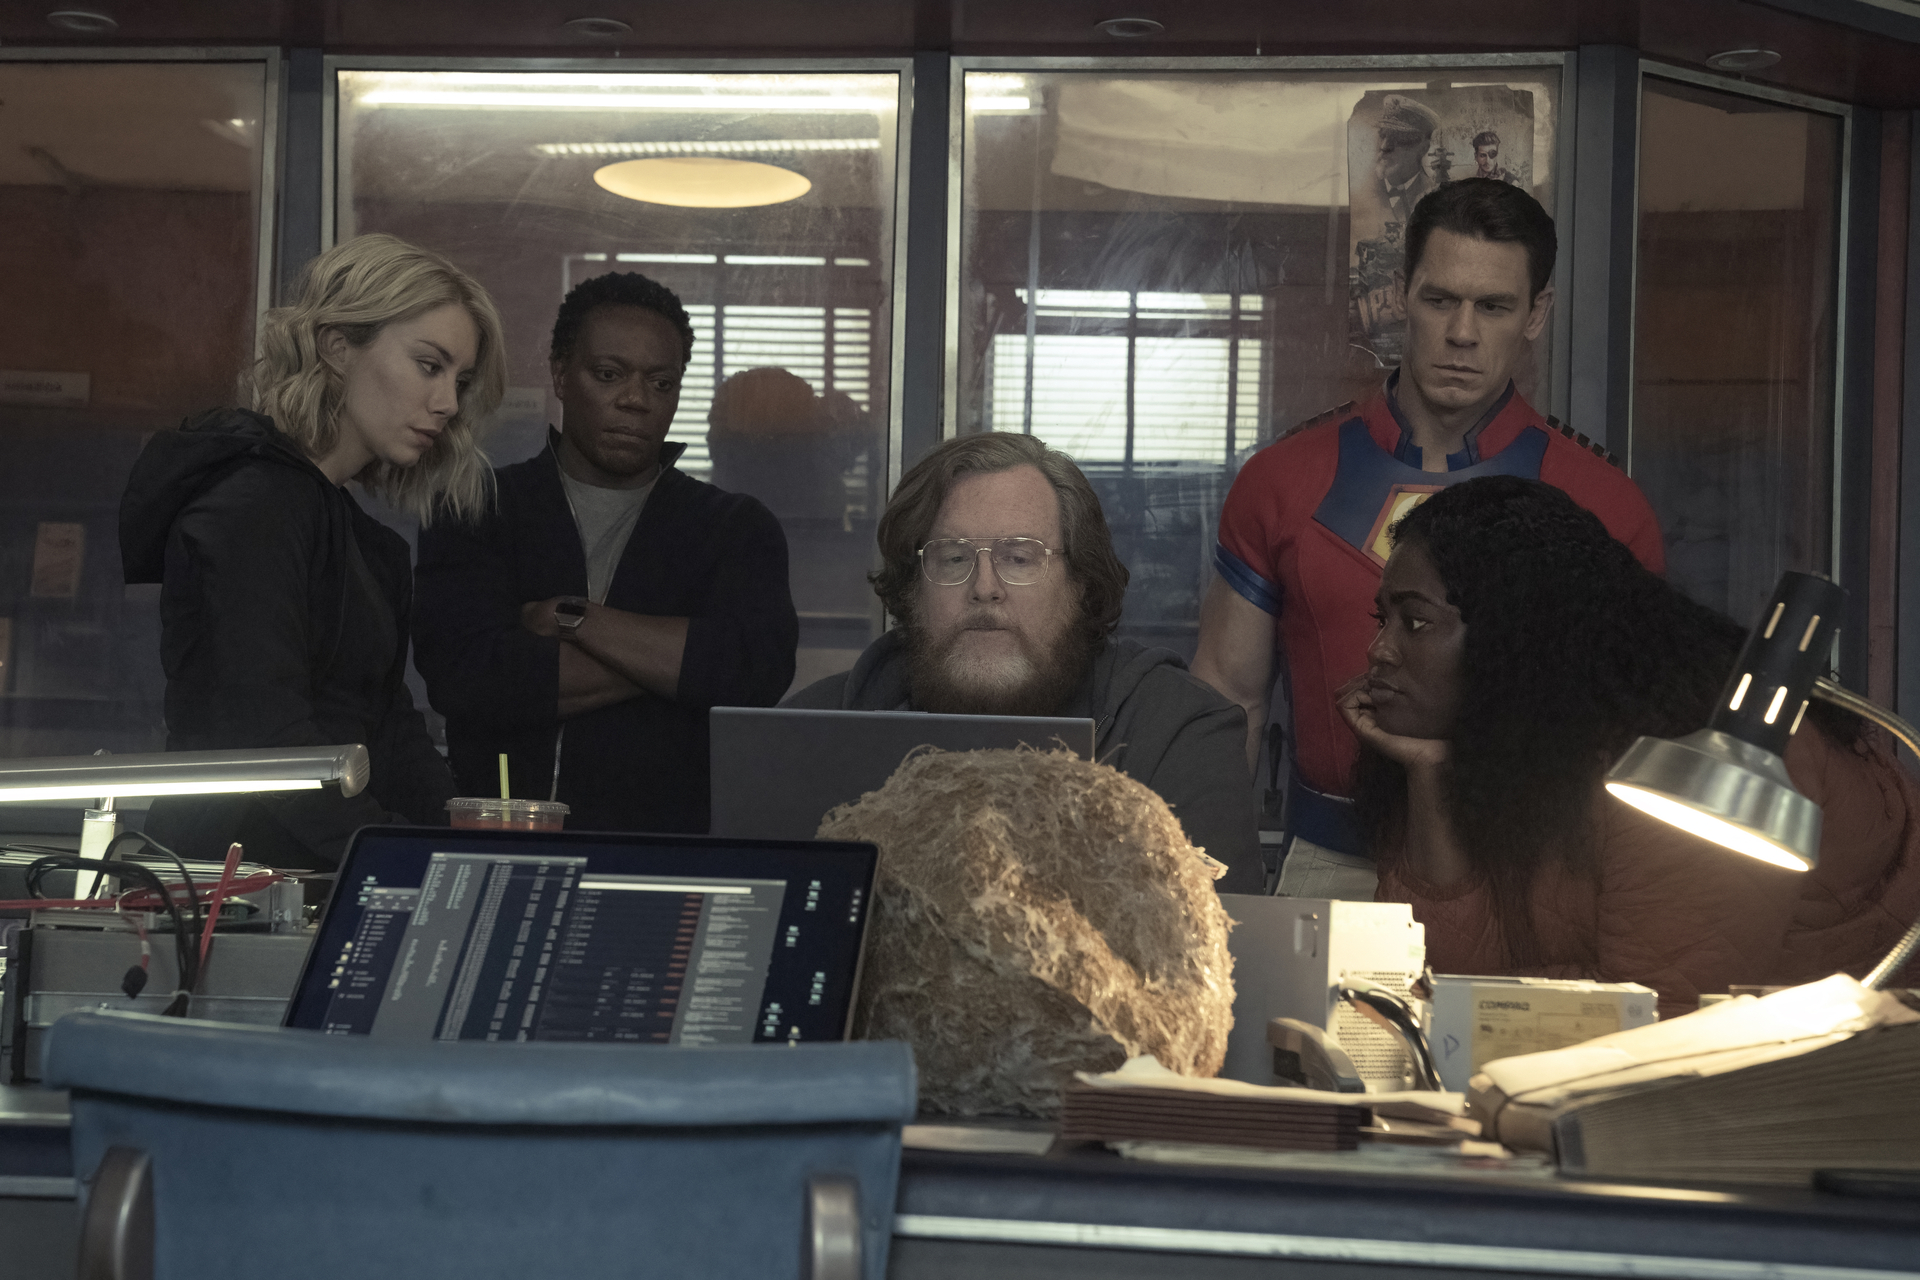 Jennifer Holland, Chukwudi Iwuji, Steve Agee, John Cena, and Danielle Brooks in DC's 'Peacemaker' Episode 6. They're all gathered around a computer.